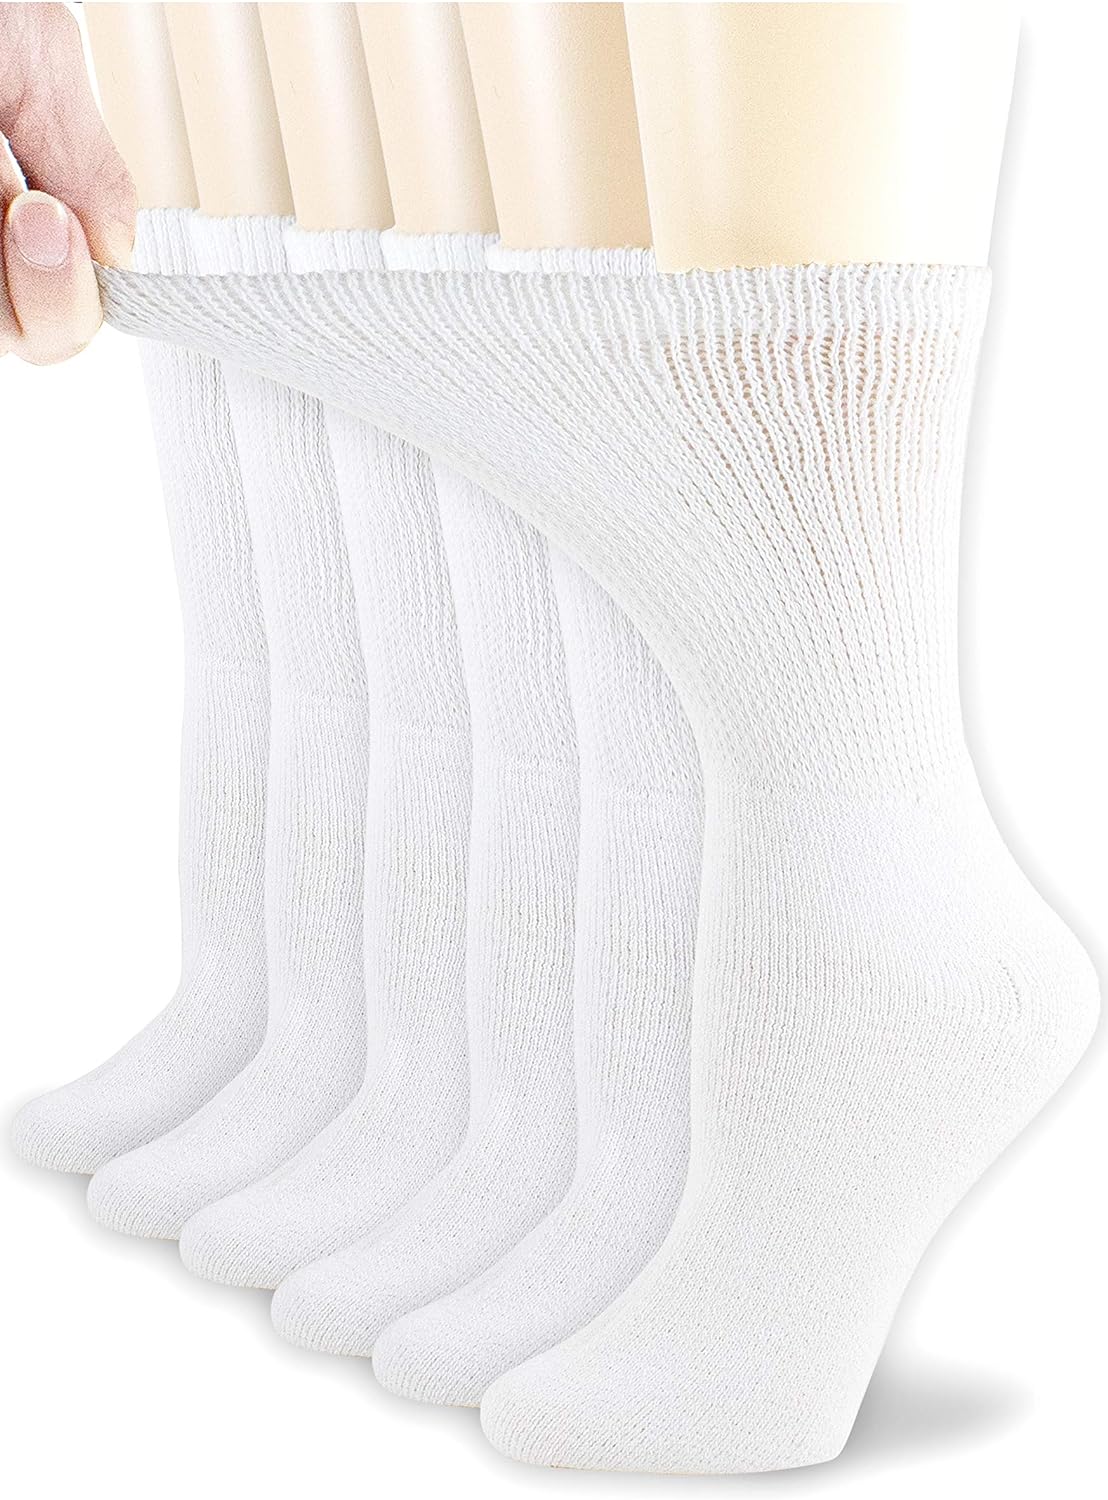 Diabetic Cotton Womens Crew Socks Health Circulatory Physicians Approved Non Binding Top 6 Pack 9-11